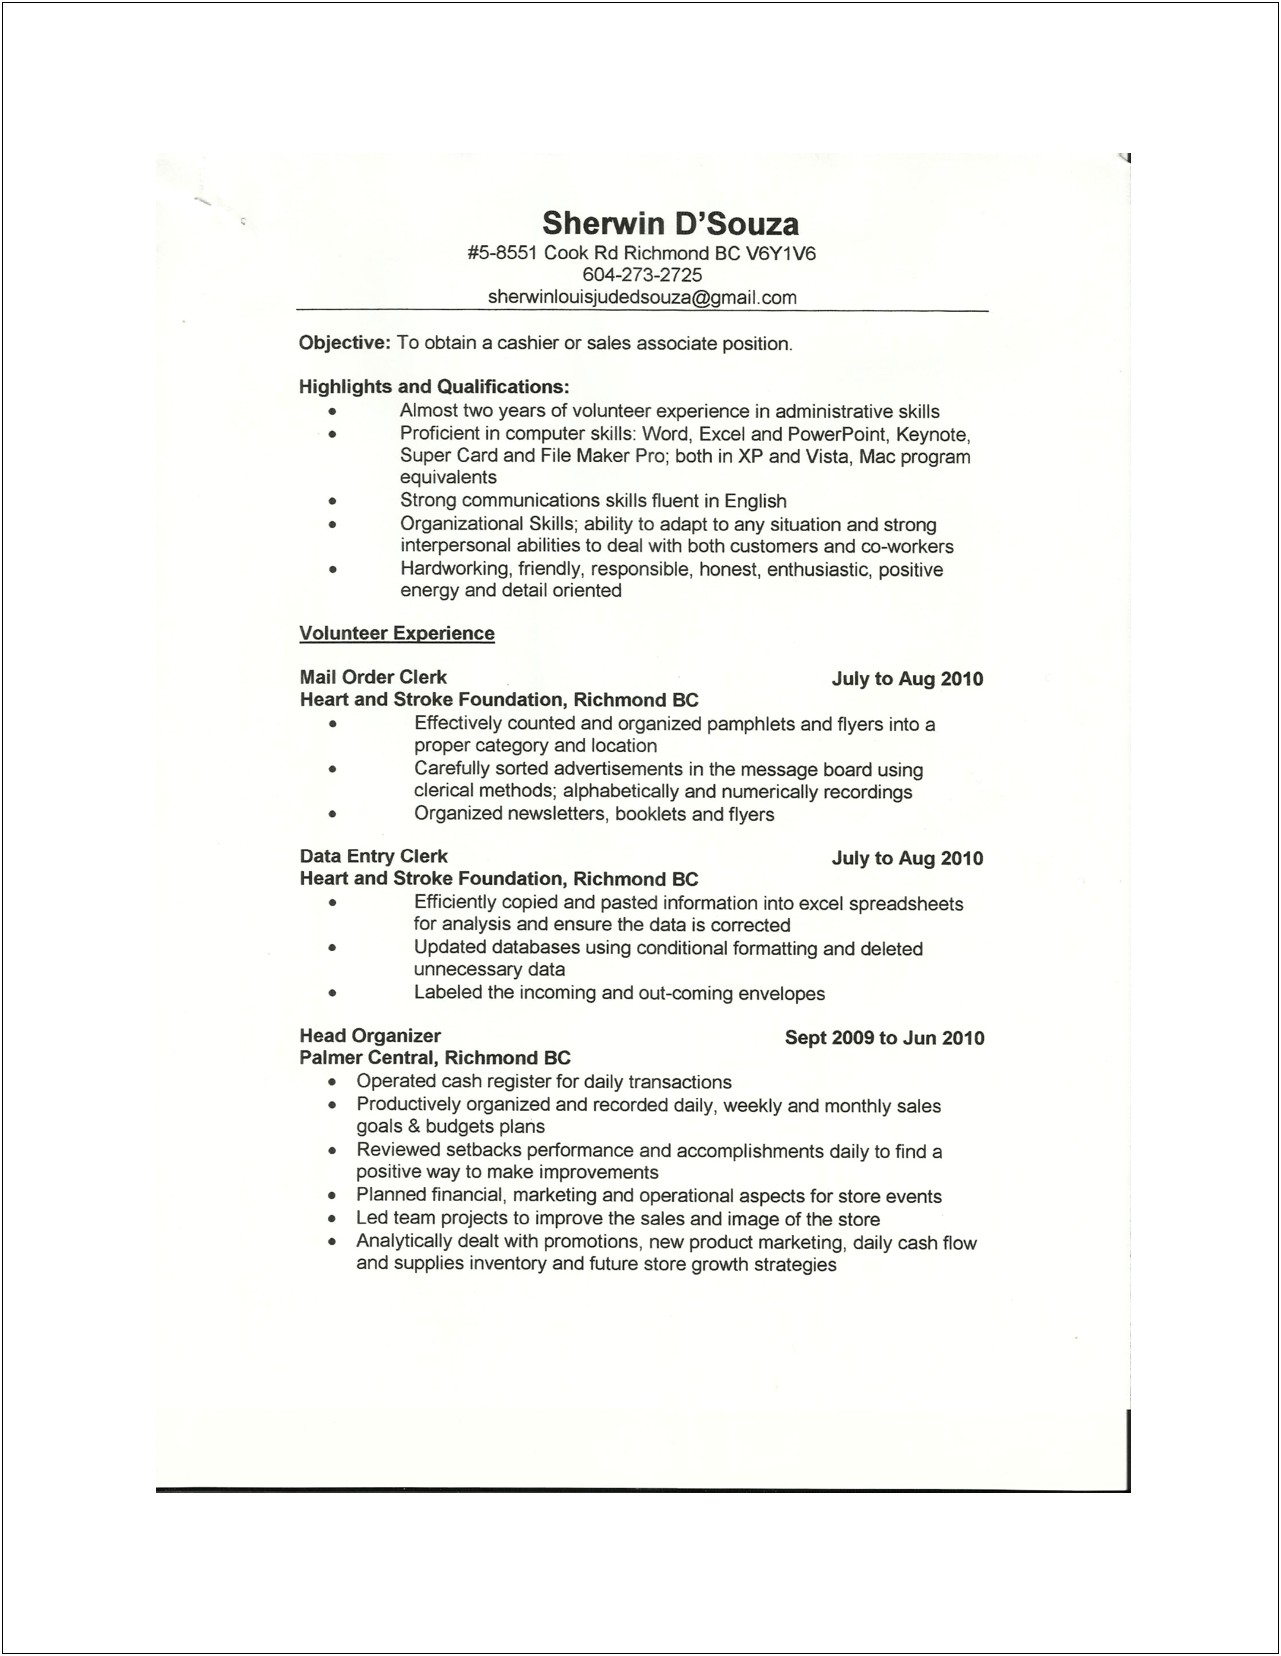 Resume Objective Examples For Cashier Position